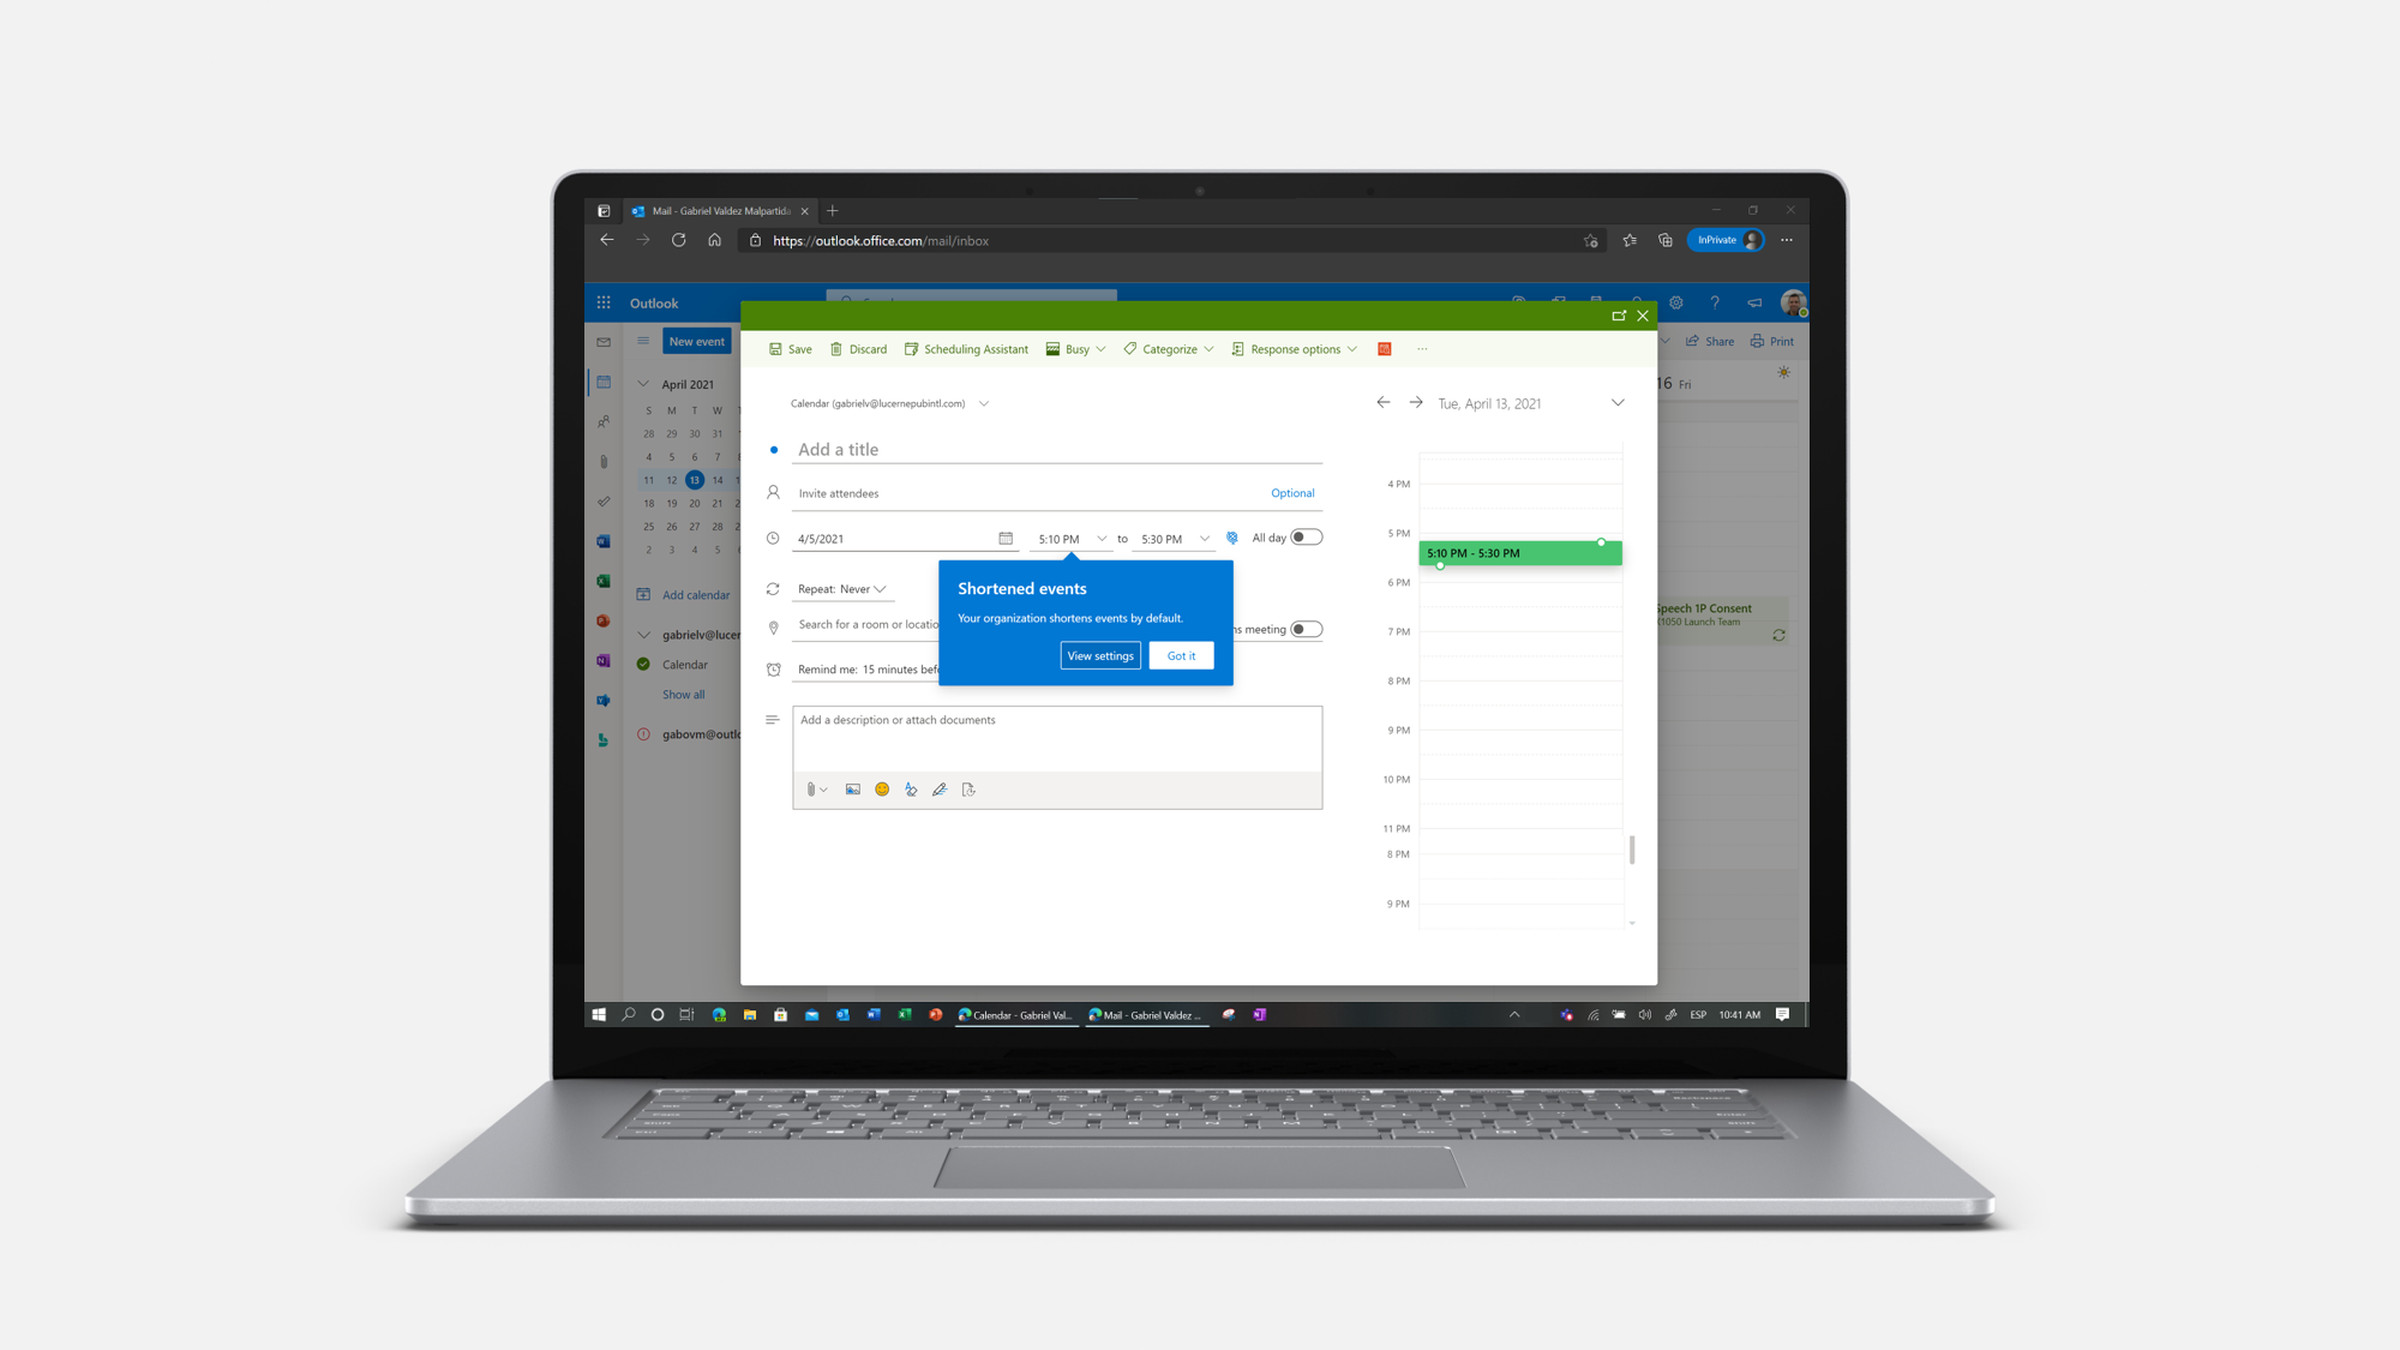 Companies can set new defaults for meetings in Outlook.